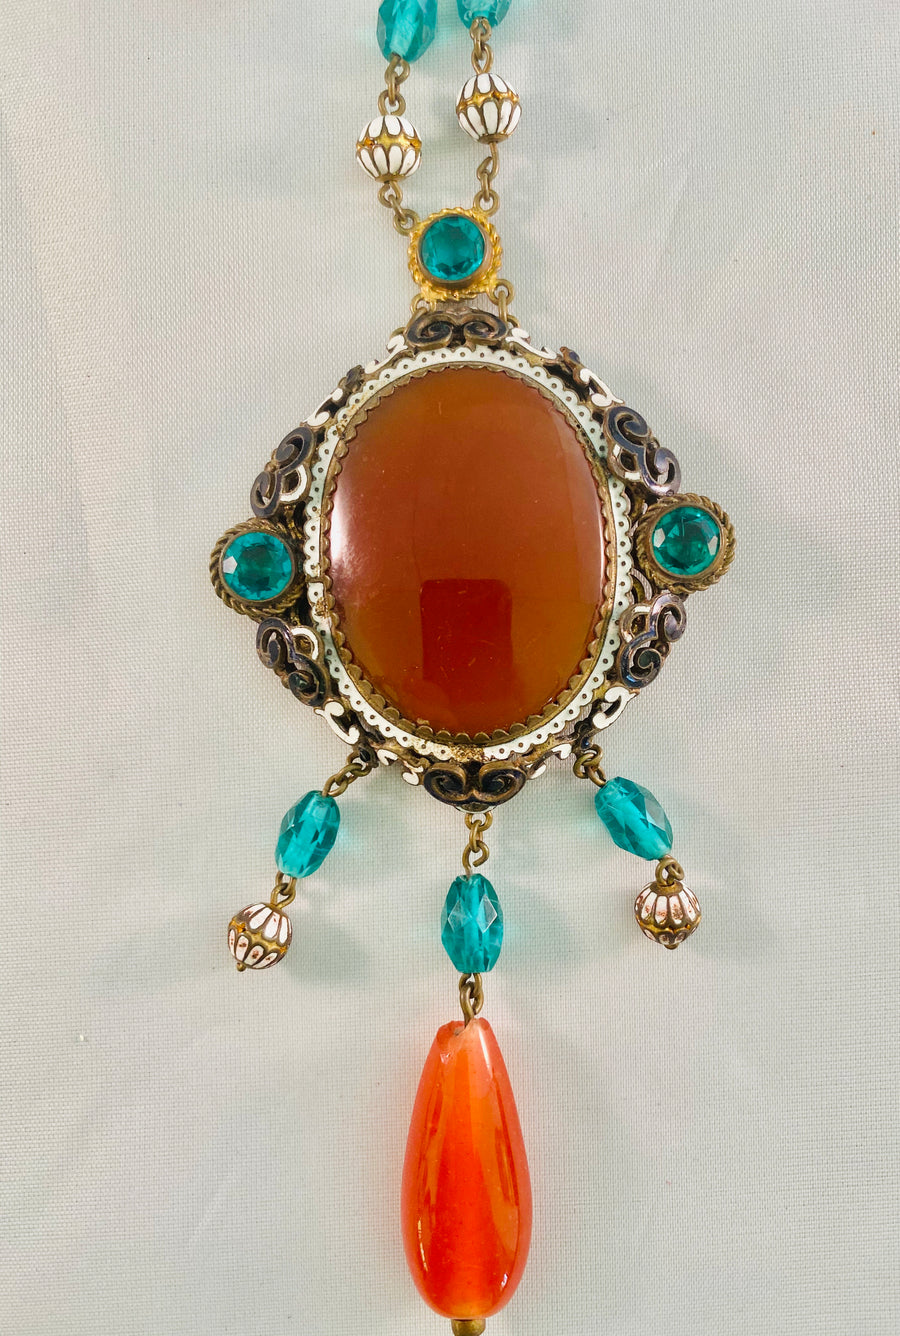 Austro Hungarian Necklace